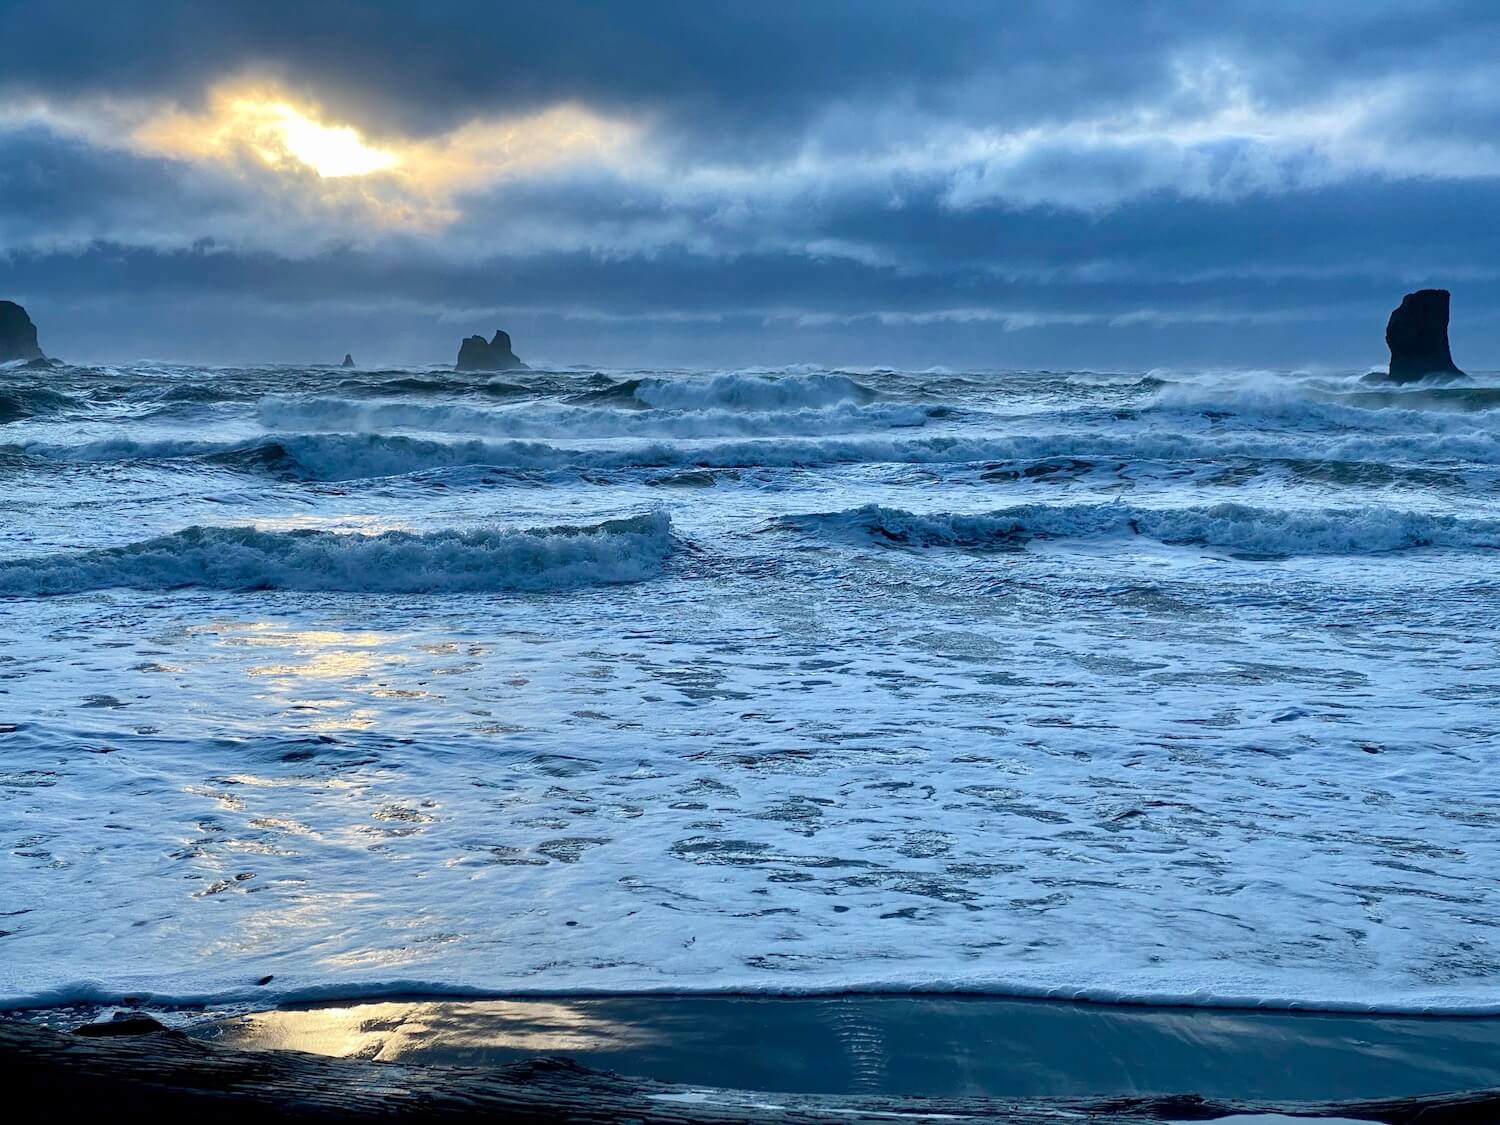  A Washington State beach scene with crashing waves on the sand of the coast. Several single rocks pop up in the background as the sun shines through dark storm clouds.